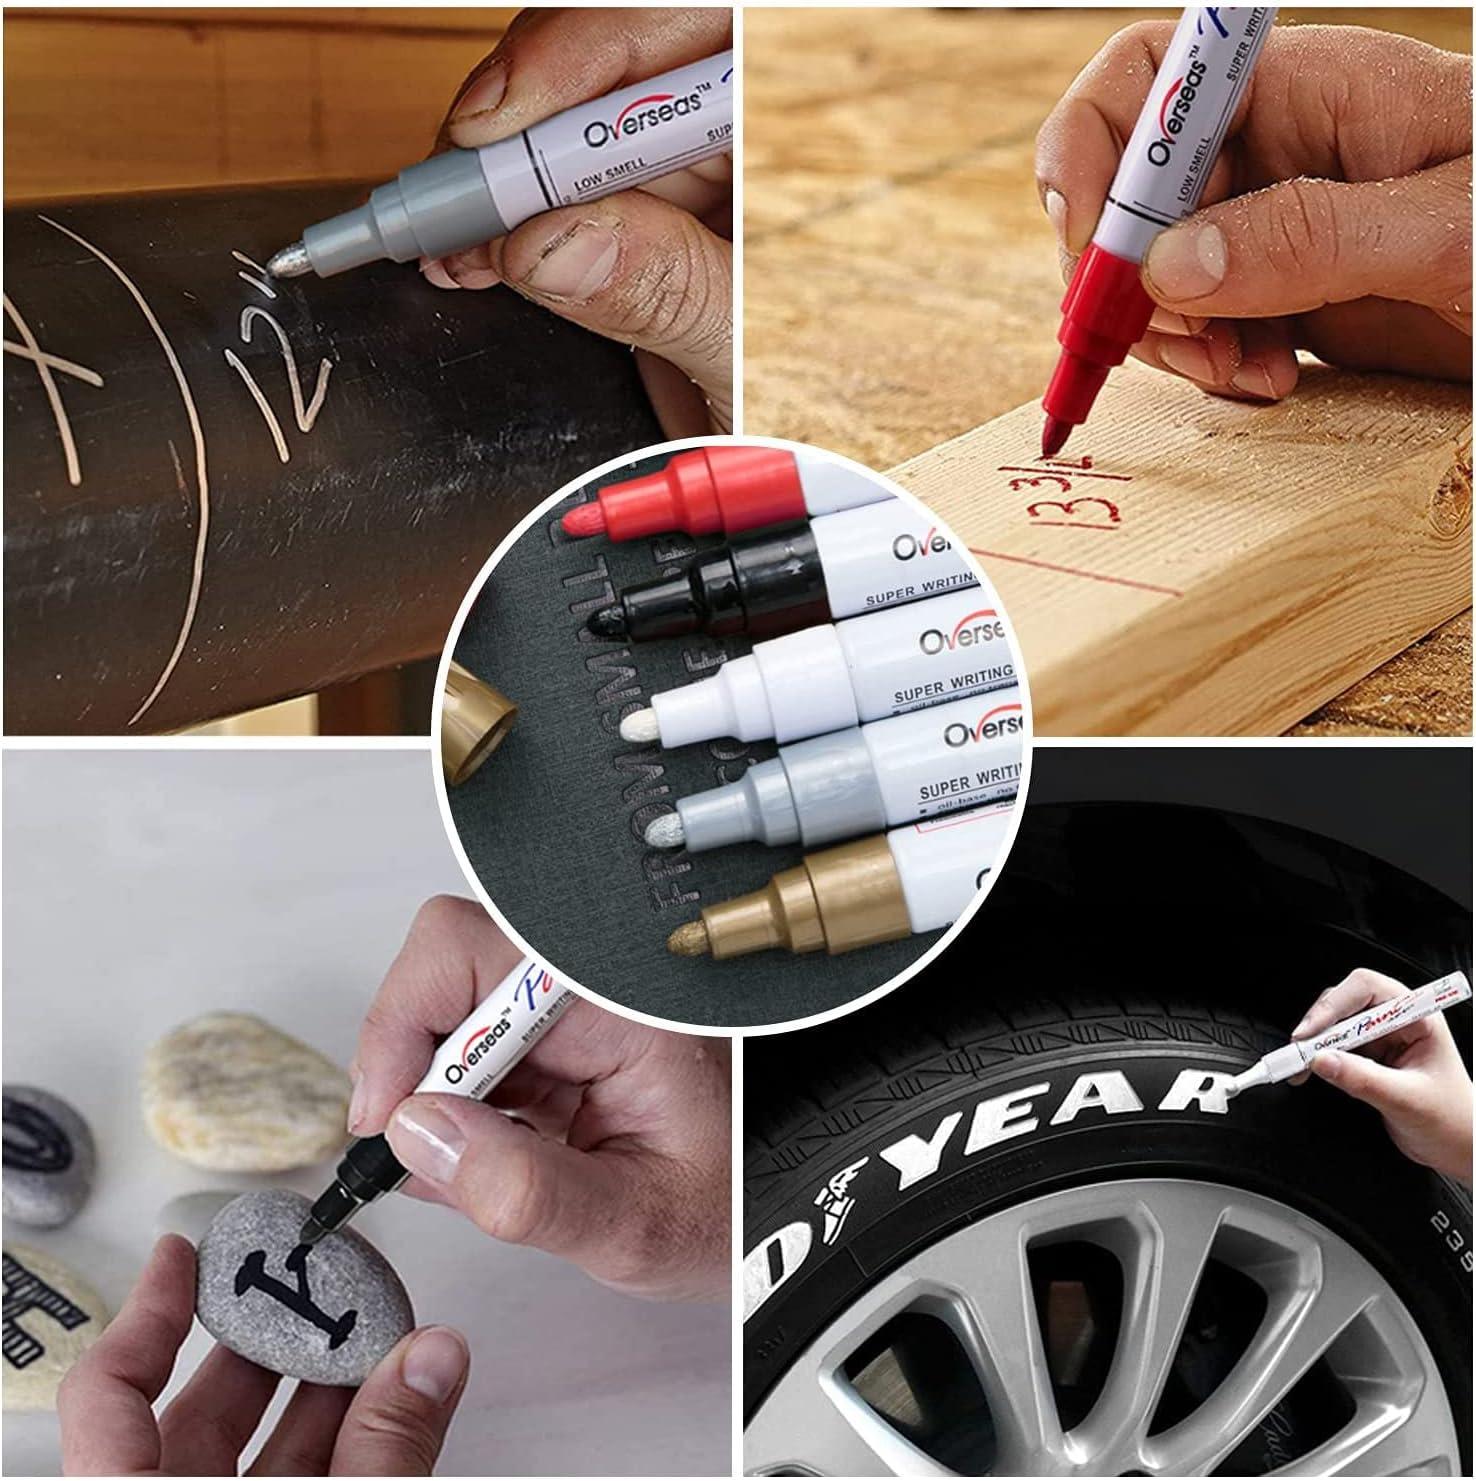 Red Long Lasting Interior Tire Paint Pen Permanent Water Proof Marker- Each